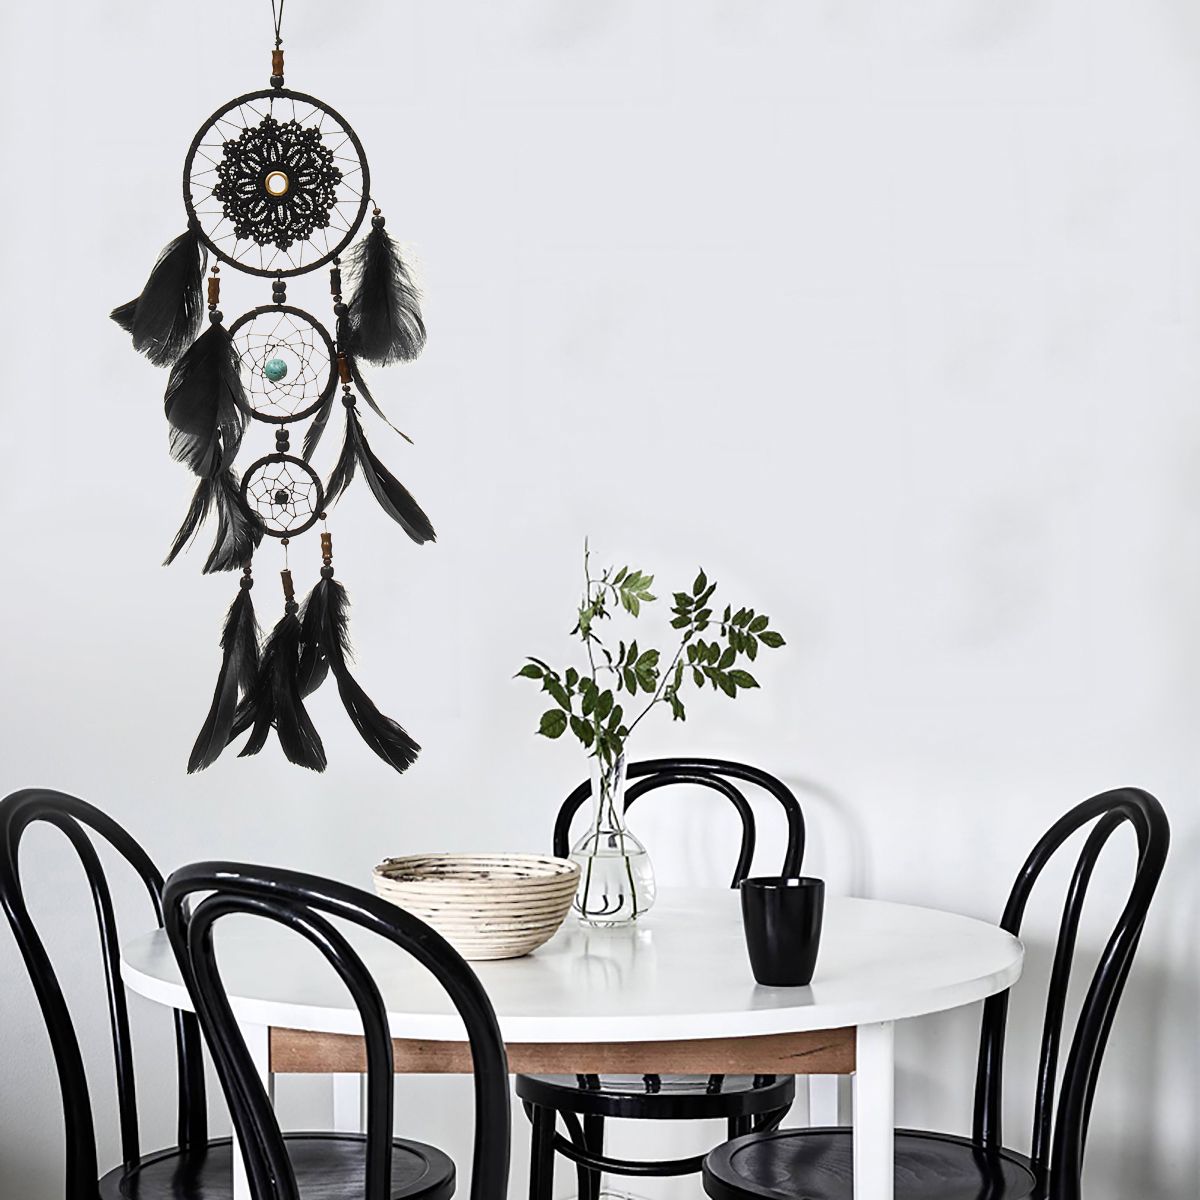 Handmade-Dream-Catcher-Black-Feather-Wood-Beads-Balcony-Room-Wall-Hanging-Decorations-1557062